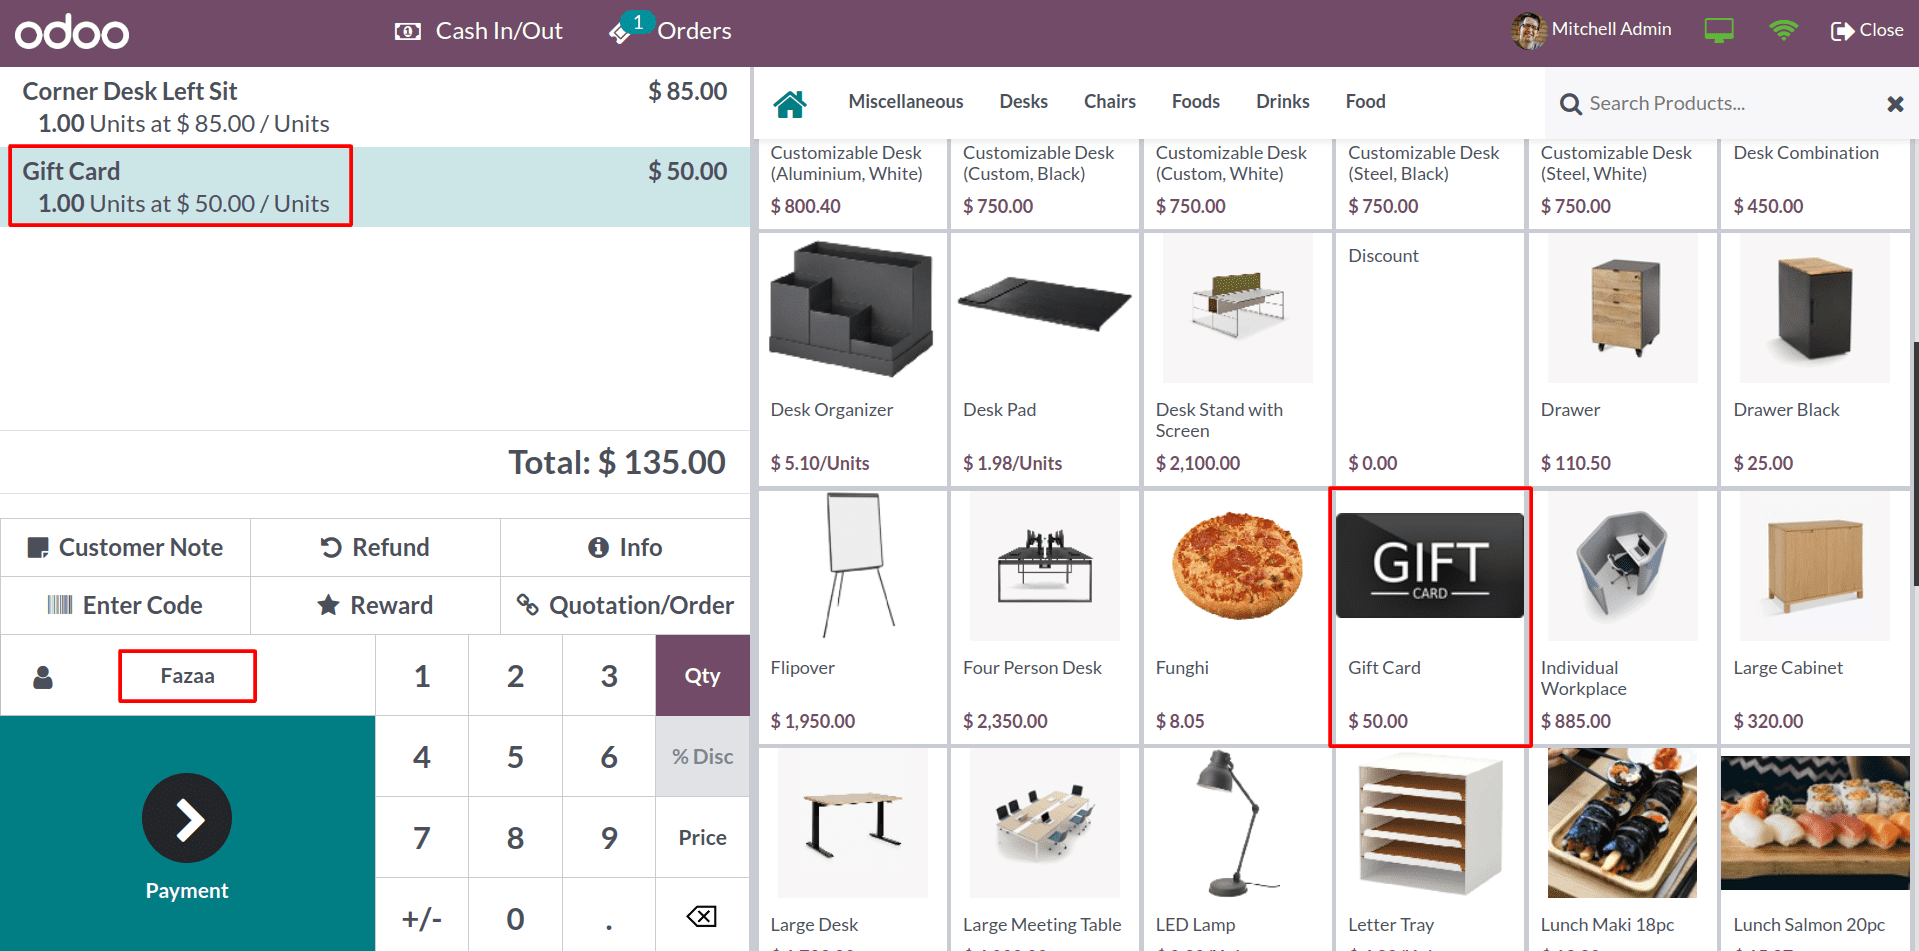 How Gift Cards Works in Odoo 16 POS-cybrosys